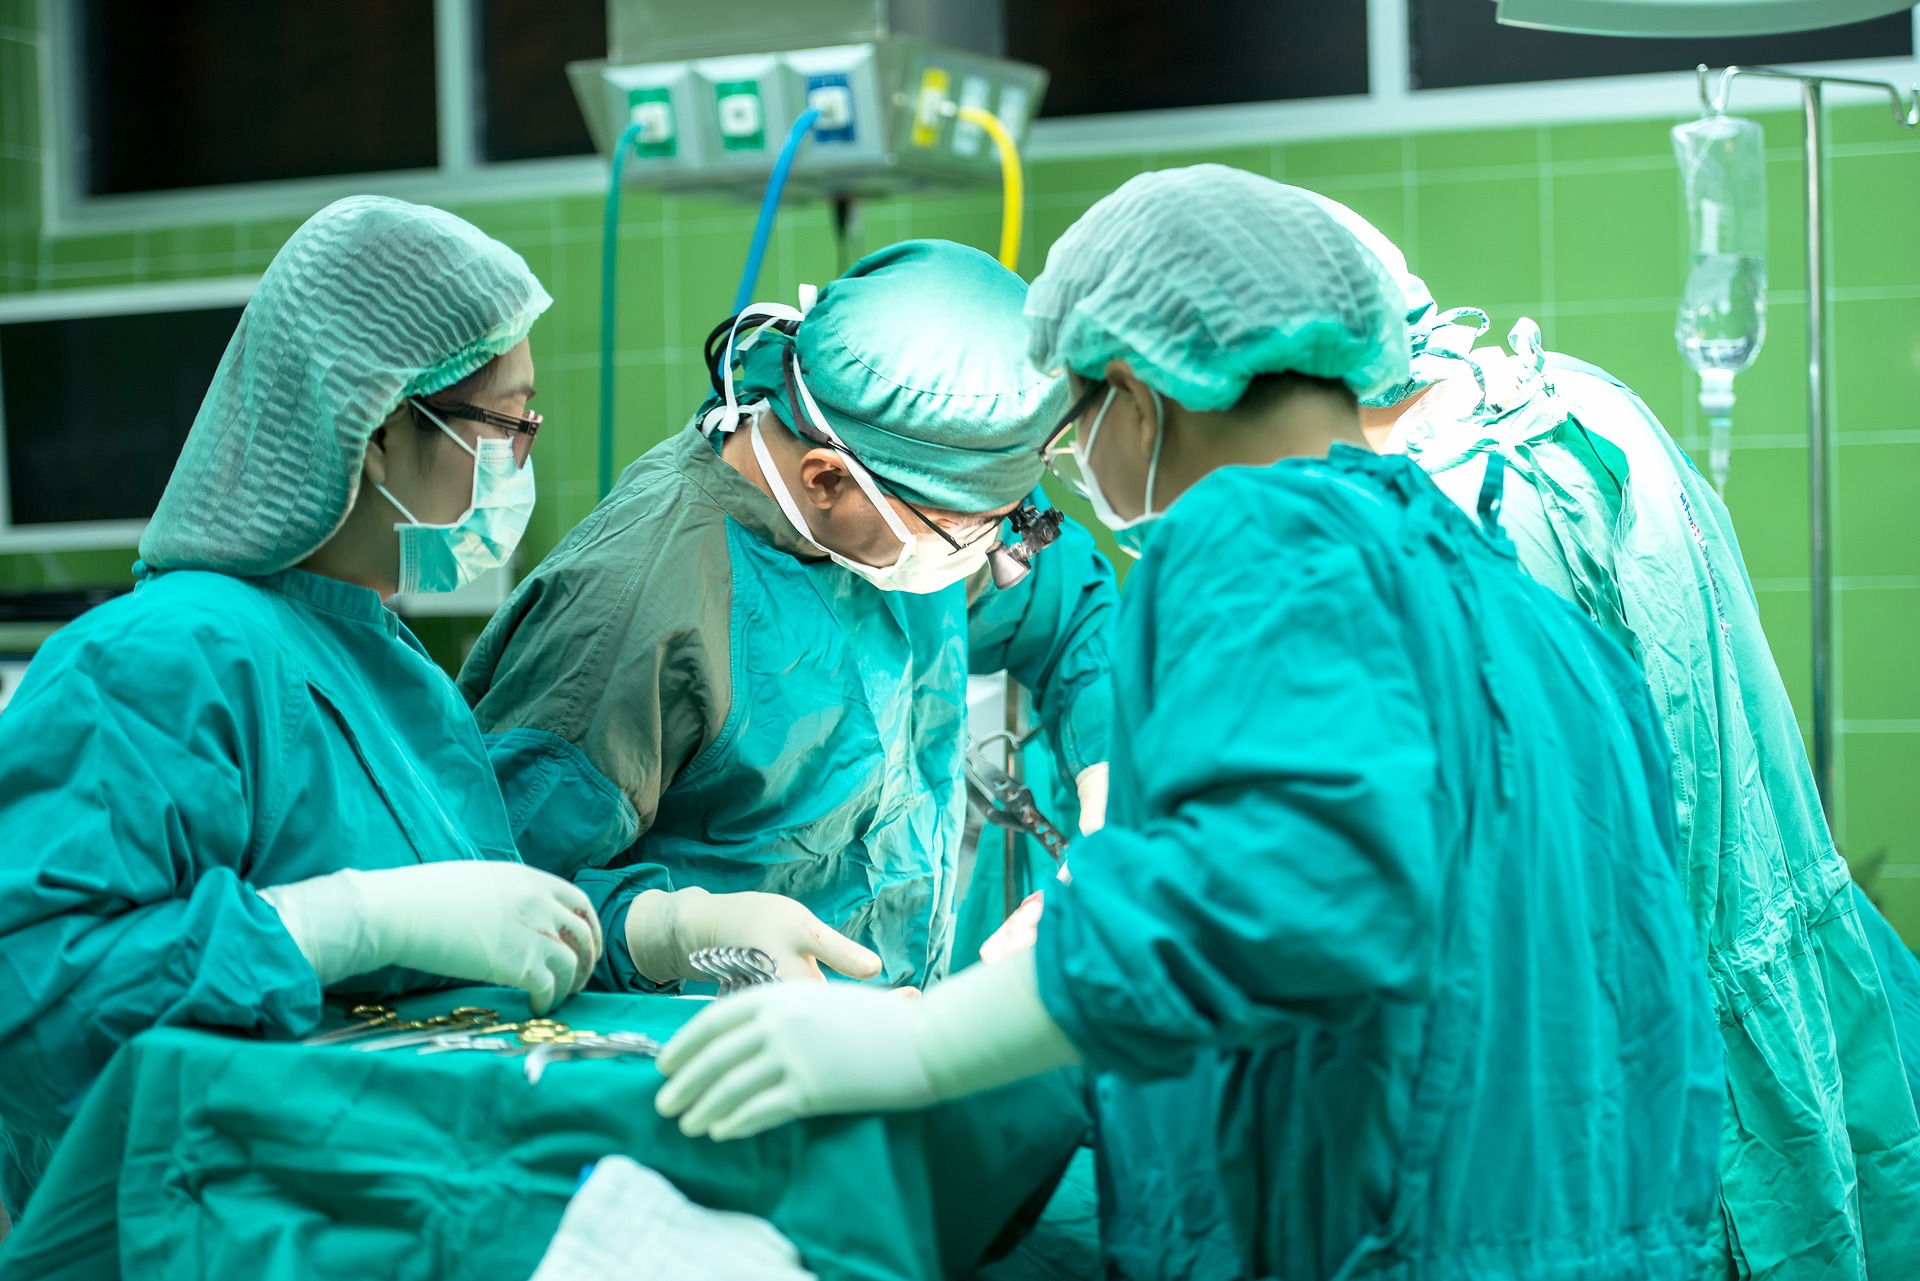 A team of surgeons are performs surgery. The patient is not visible.